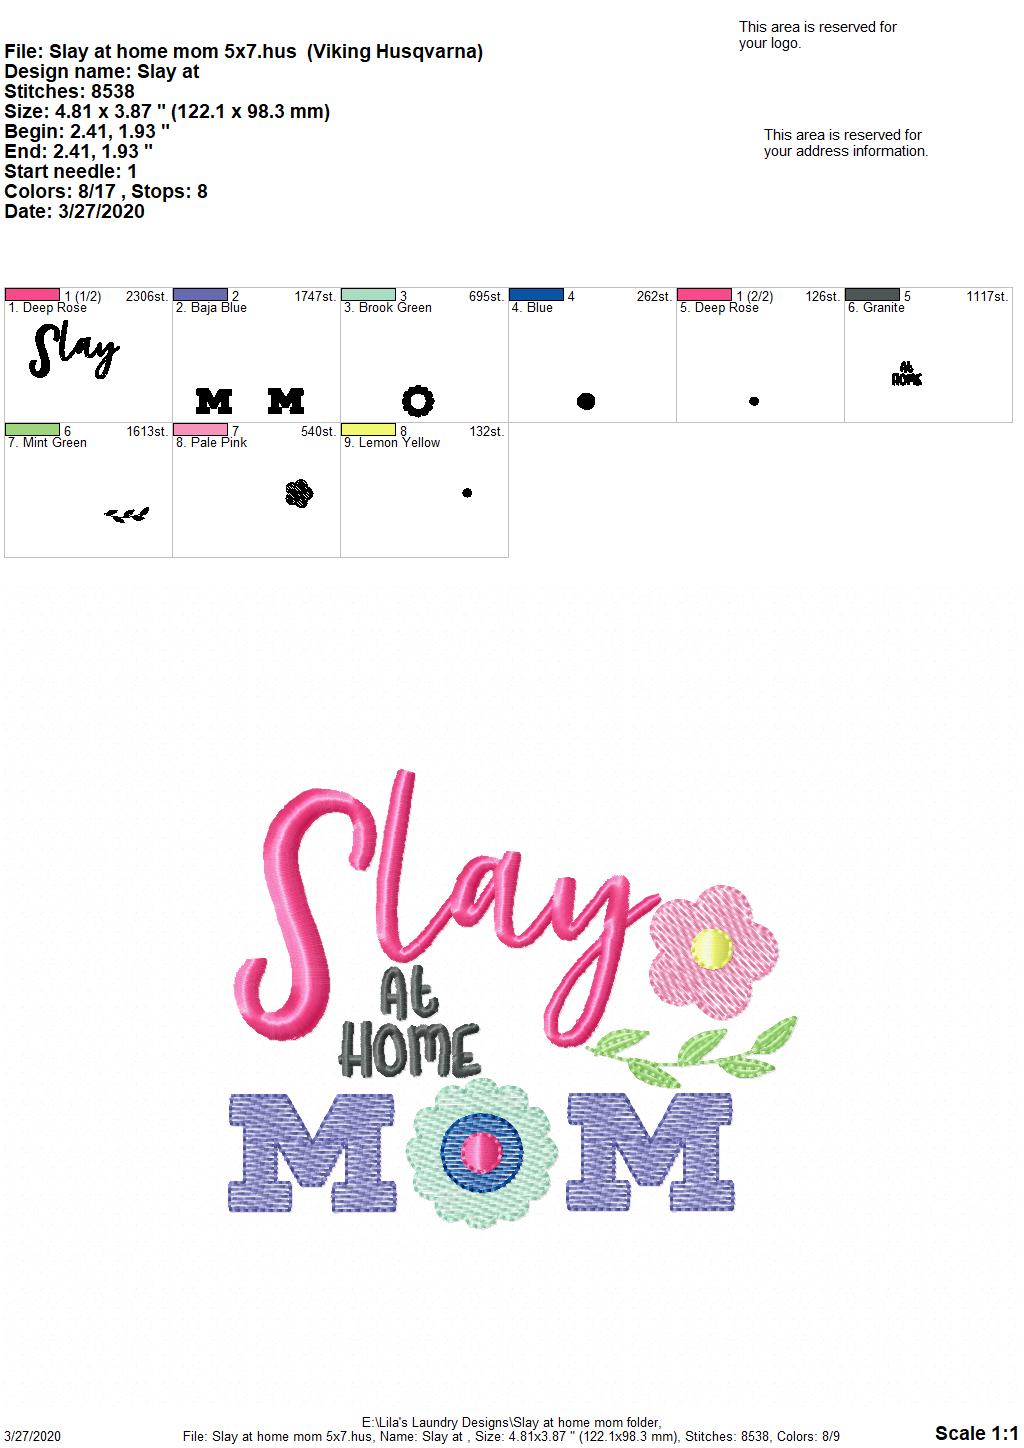 Slay at home Mom - 2 Sizes - Digital Embroidery Design